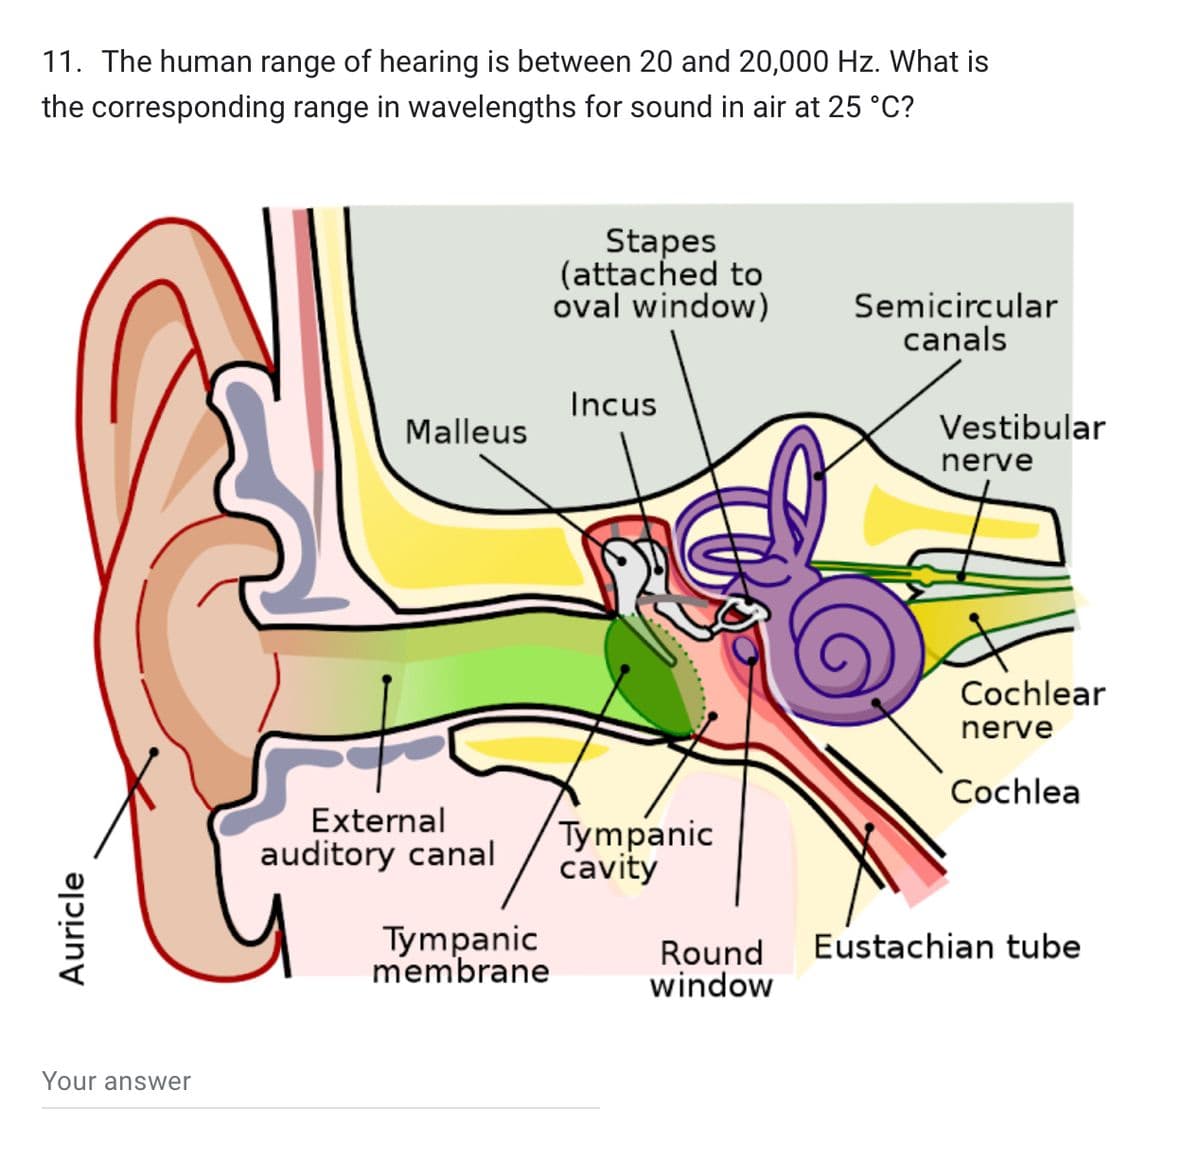 Auricle
11. The human range of hearing is between 20 and 20,000 Hz. What is
the corresponding range in wavelengths for sound in air at 25 °C?
Your answer
Stapes
(attached to
oval window)
Semicircular
Incus
Malleus
External
auditory canal
Tympanic
membrane
canals
Vestibular
nerve
Cochlear
nerve
Cochlea
Tympanic
cavity
Round
Eustachian tube
window